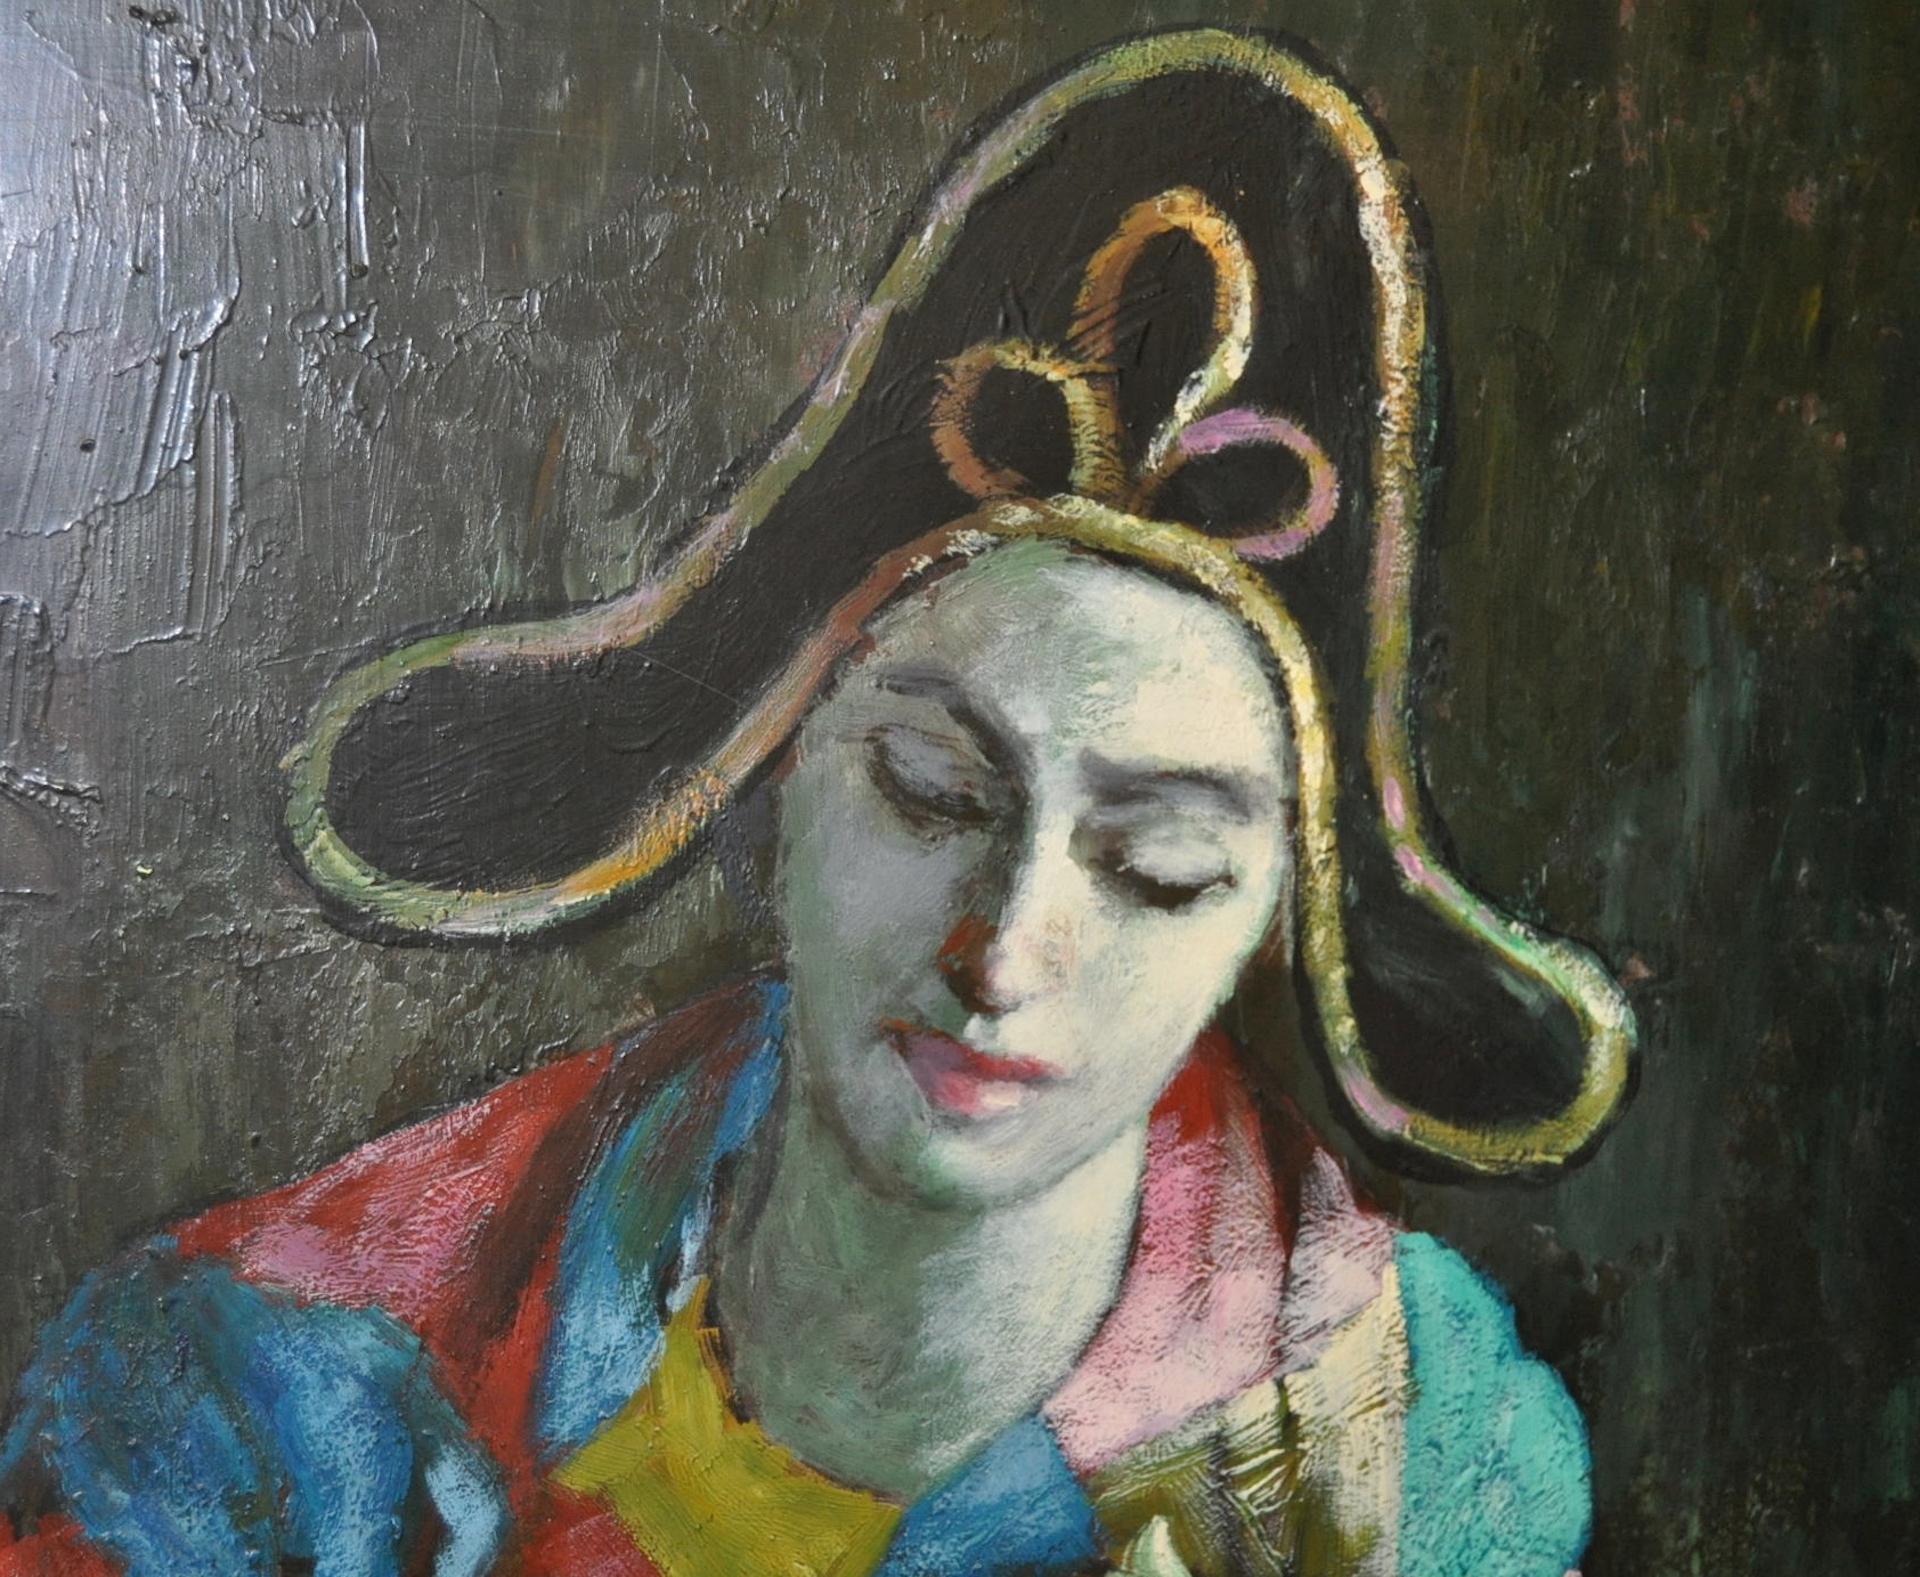 Mid-Century Modern harlequin oil painting.

This fine Harlequin painting is bold, bright, colorful and executed by a very talented artist. 

This painting is created with oils on board.

Dimensions 24